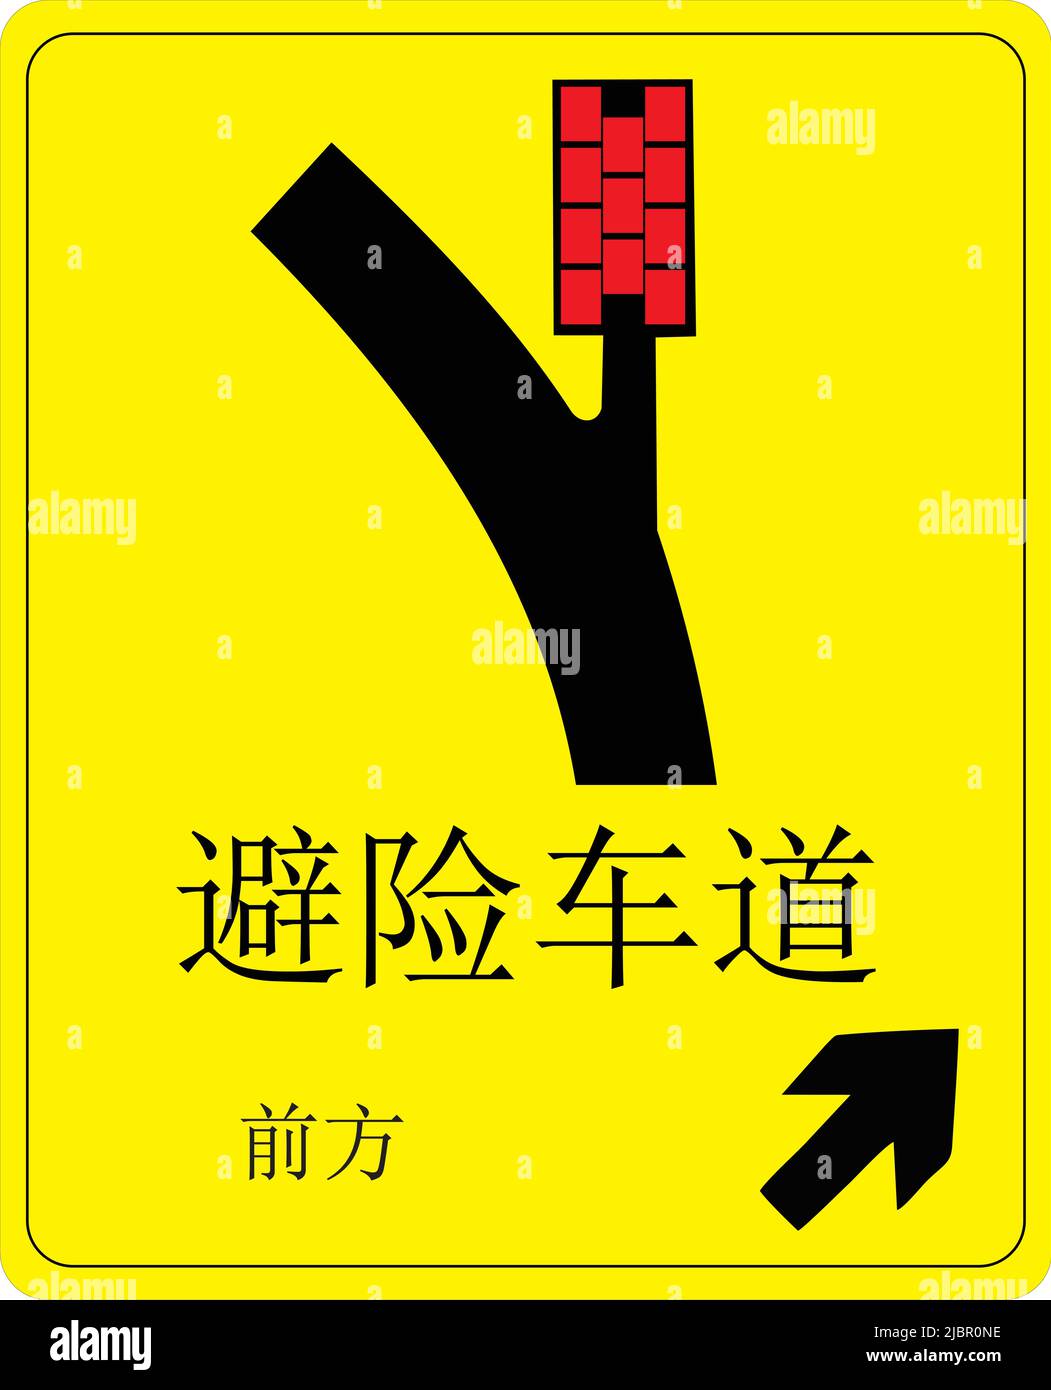 all, car, care, carefully, caution, china, color, comparison, danger, dangerous, europe, fire, flammable, gallery, hazard, highway, hong kong, ice, ic Stock Vector